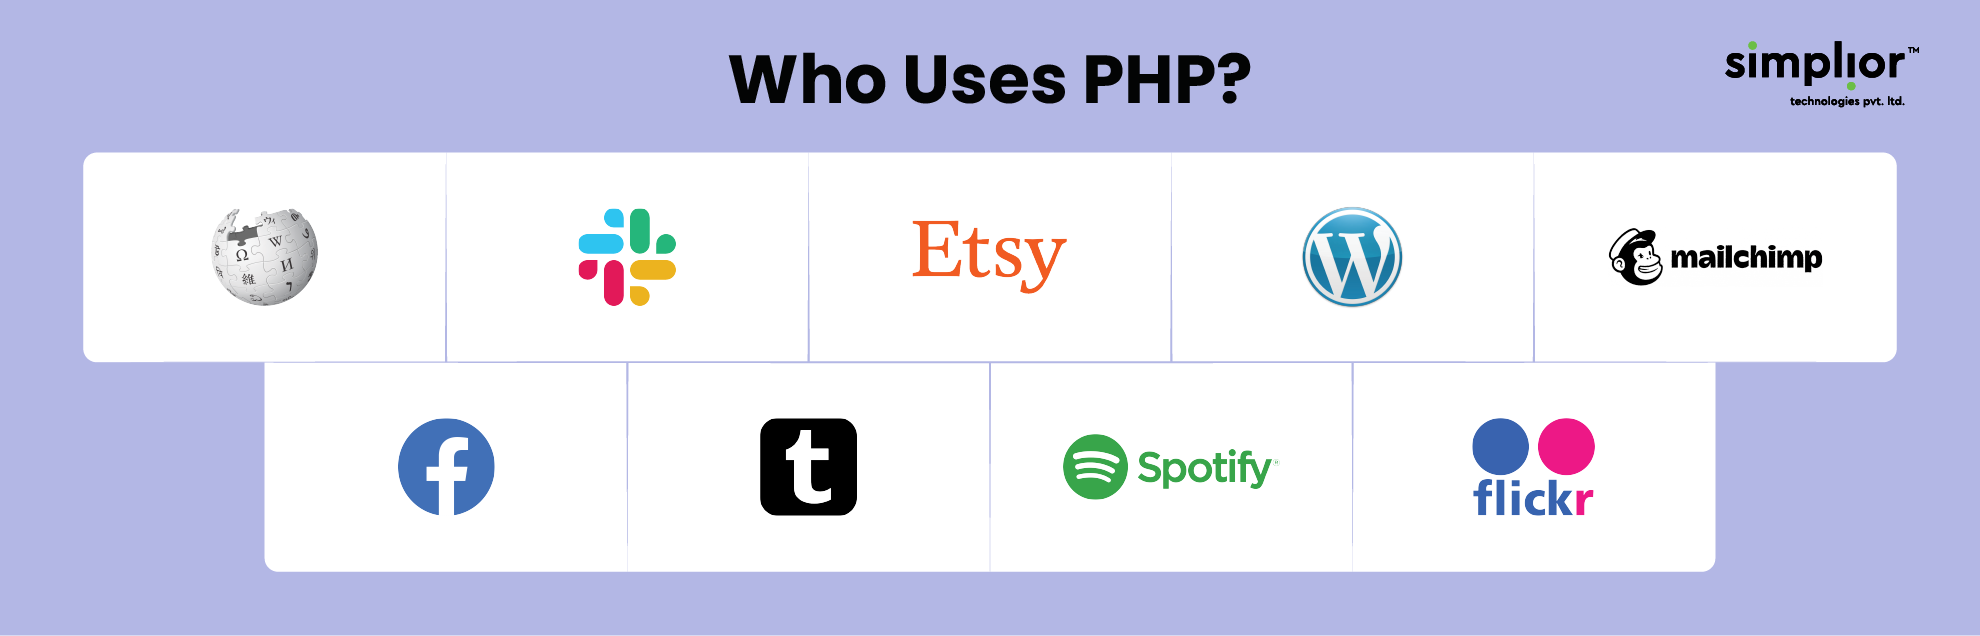 Who Uses PHP - Simplior